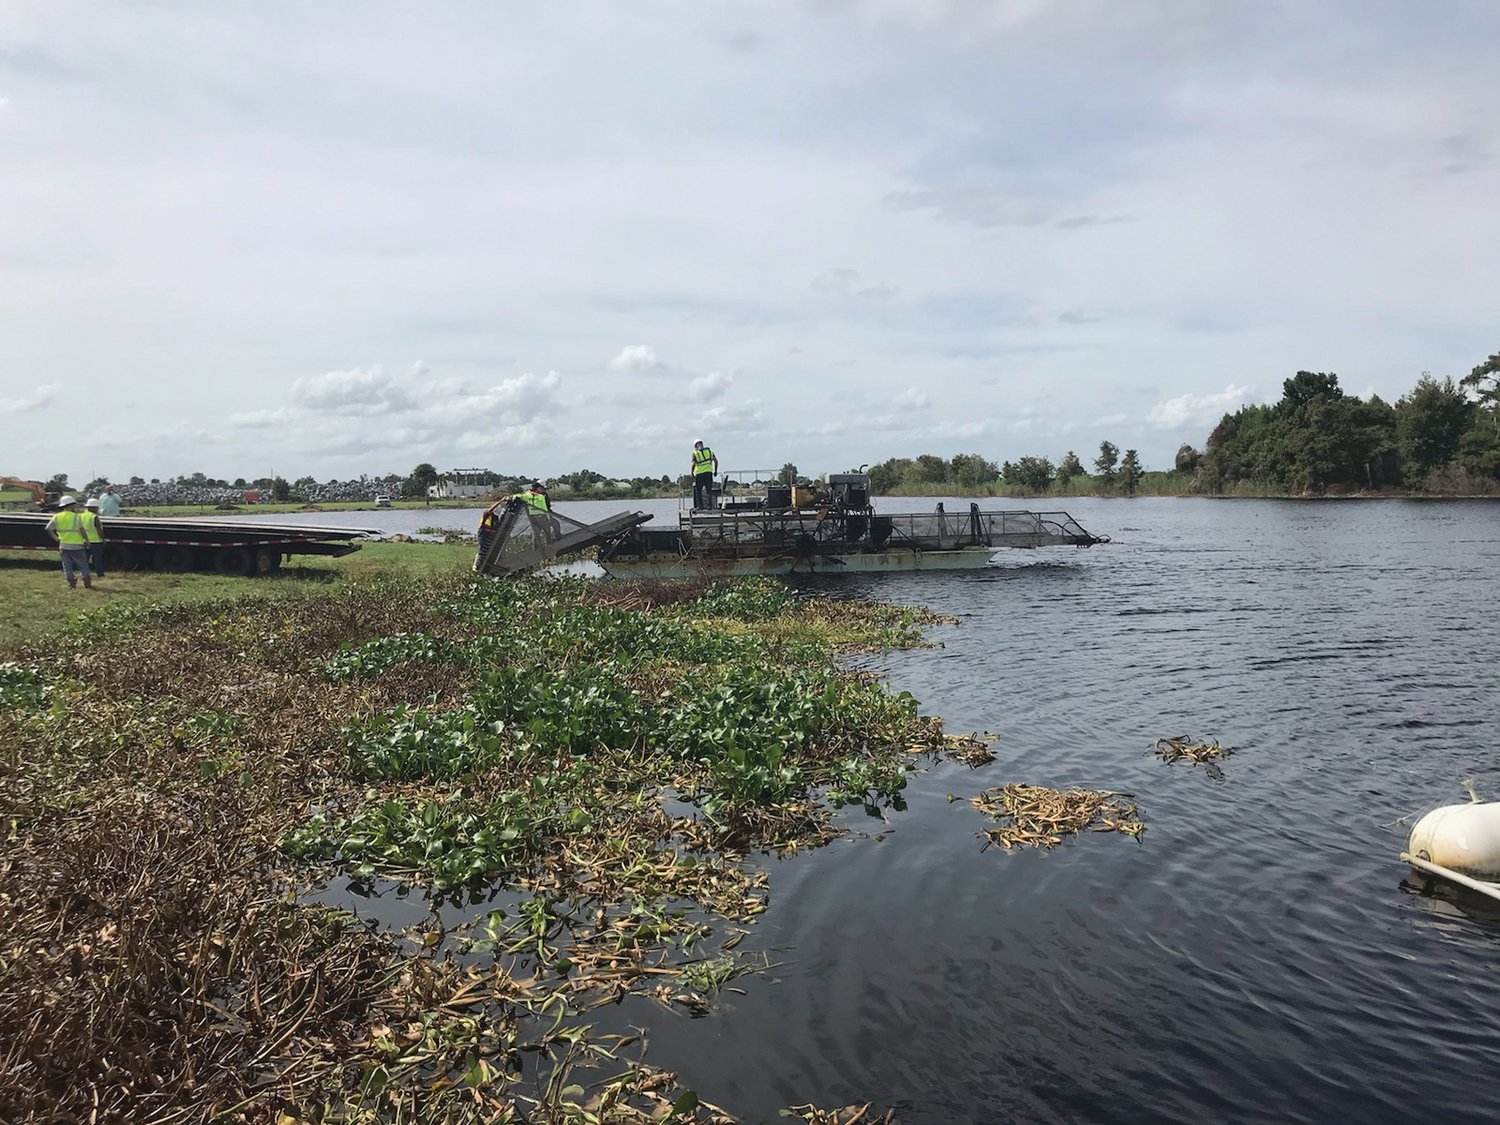 MOORE HAVEN – The U.S. Army Corps of Engineers is using mechanical harvesters and heavy equipment to clear the vegetation blocking the Lake Okeechobee Waterway at Moore Haven.